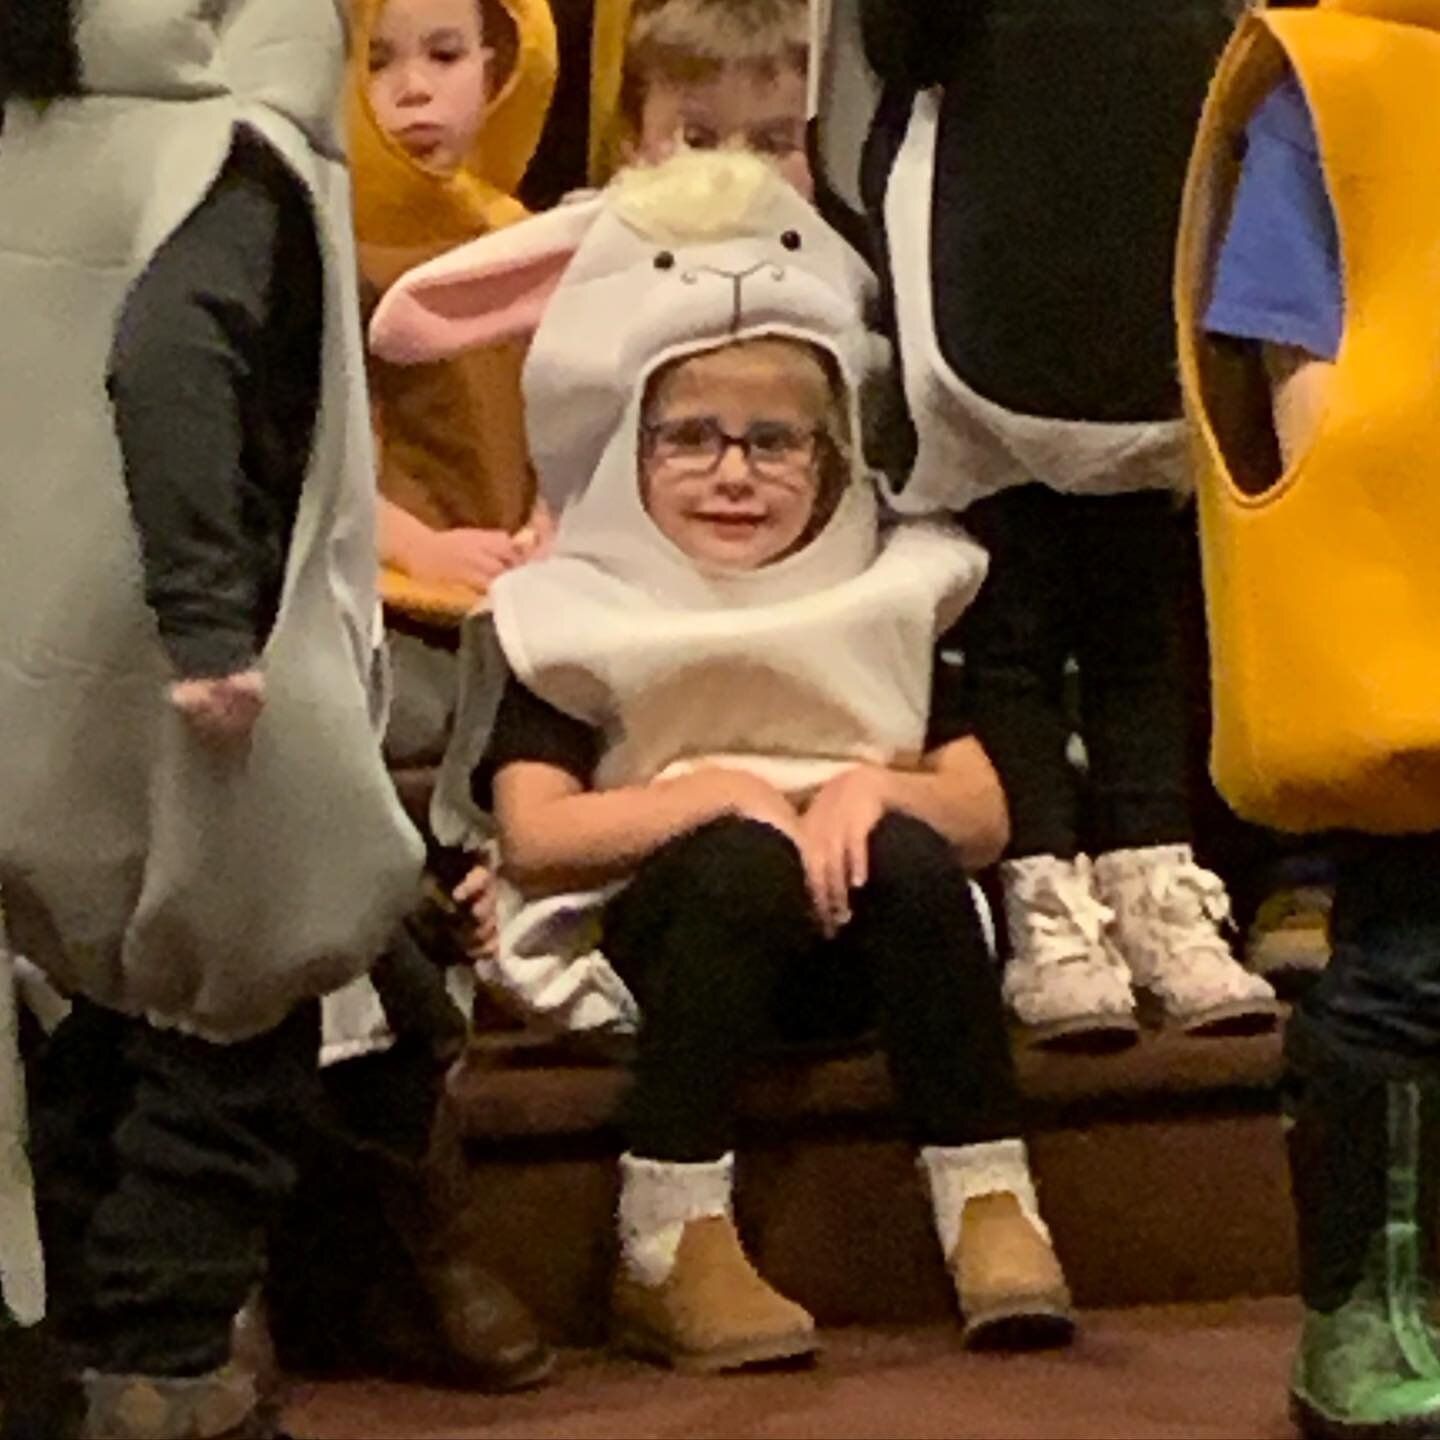 Penelope&rsquo;s first Christmas program! 🎄🐑 

A few minutes in the stranger Grandpa in the row in front of us turned and said, &ldquo;I knew she wasn&rsquo;t going to be shy by the few minutes she was sitting here.&rdquo;😂

She sang and waved her